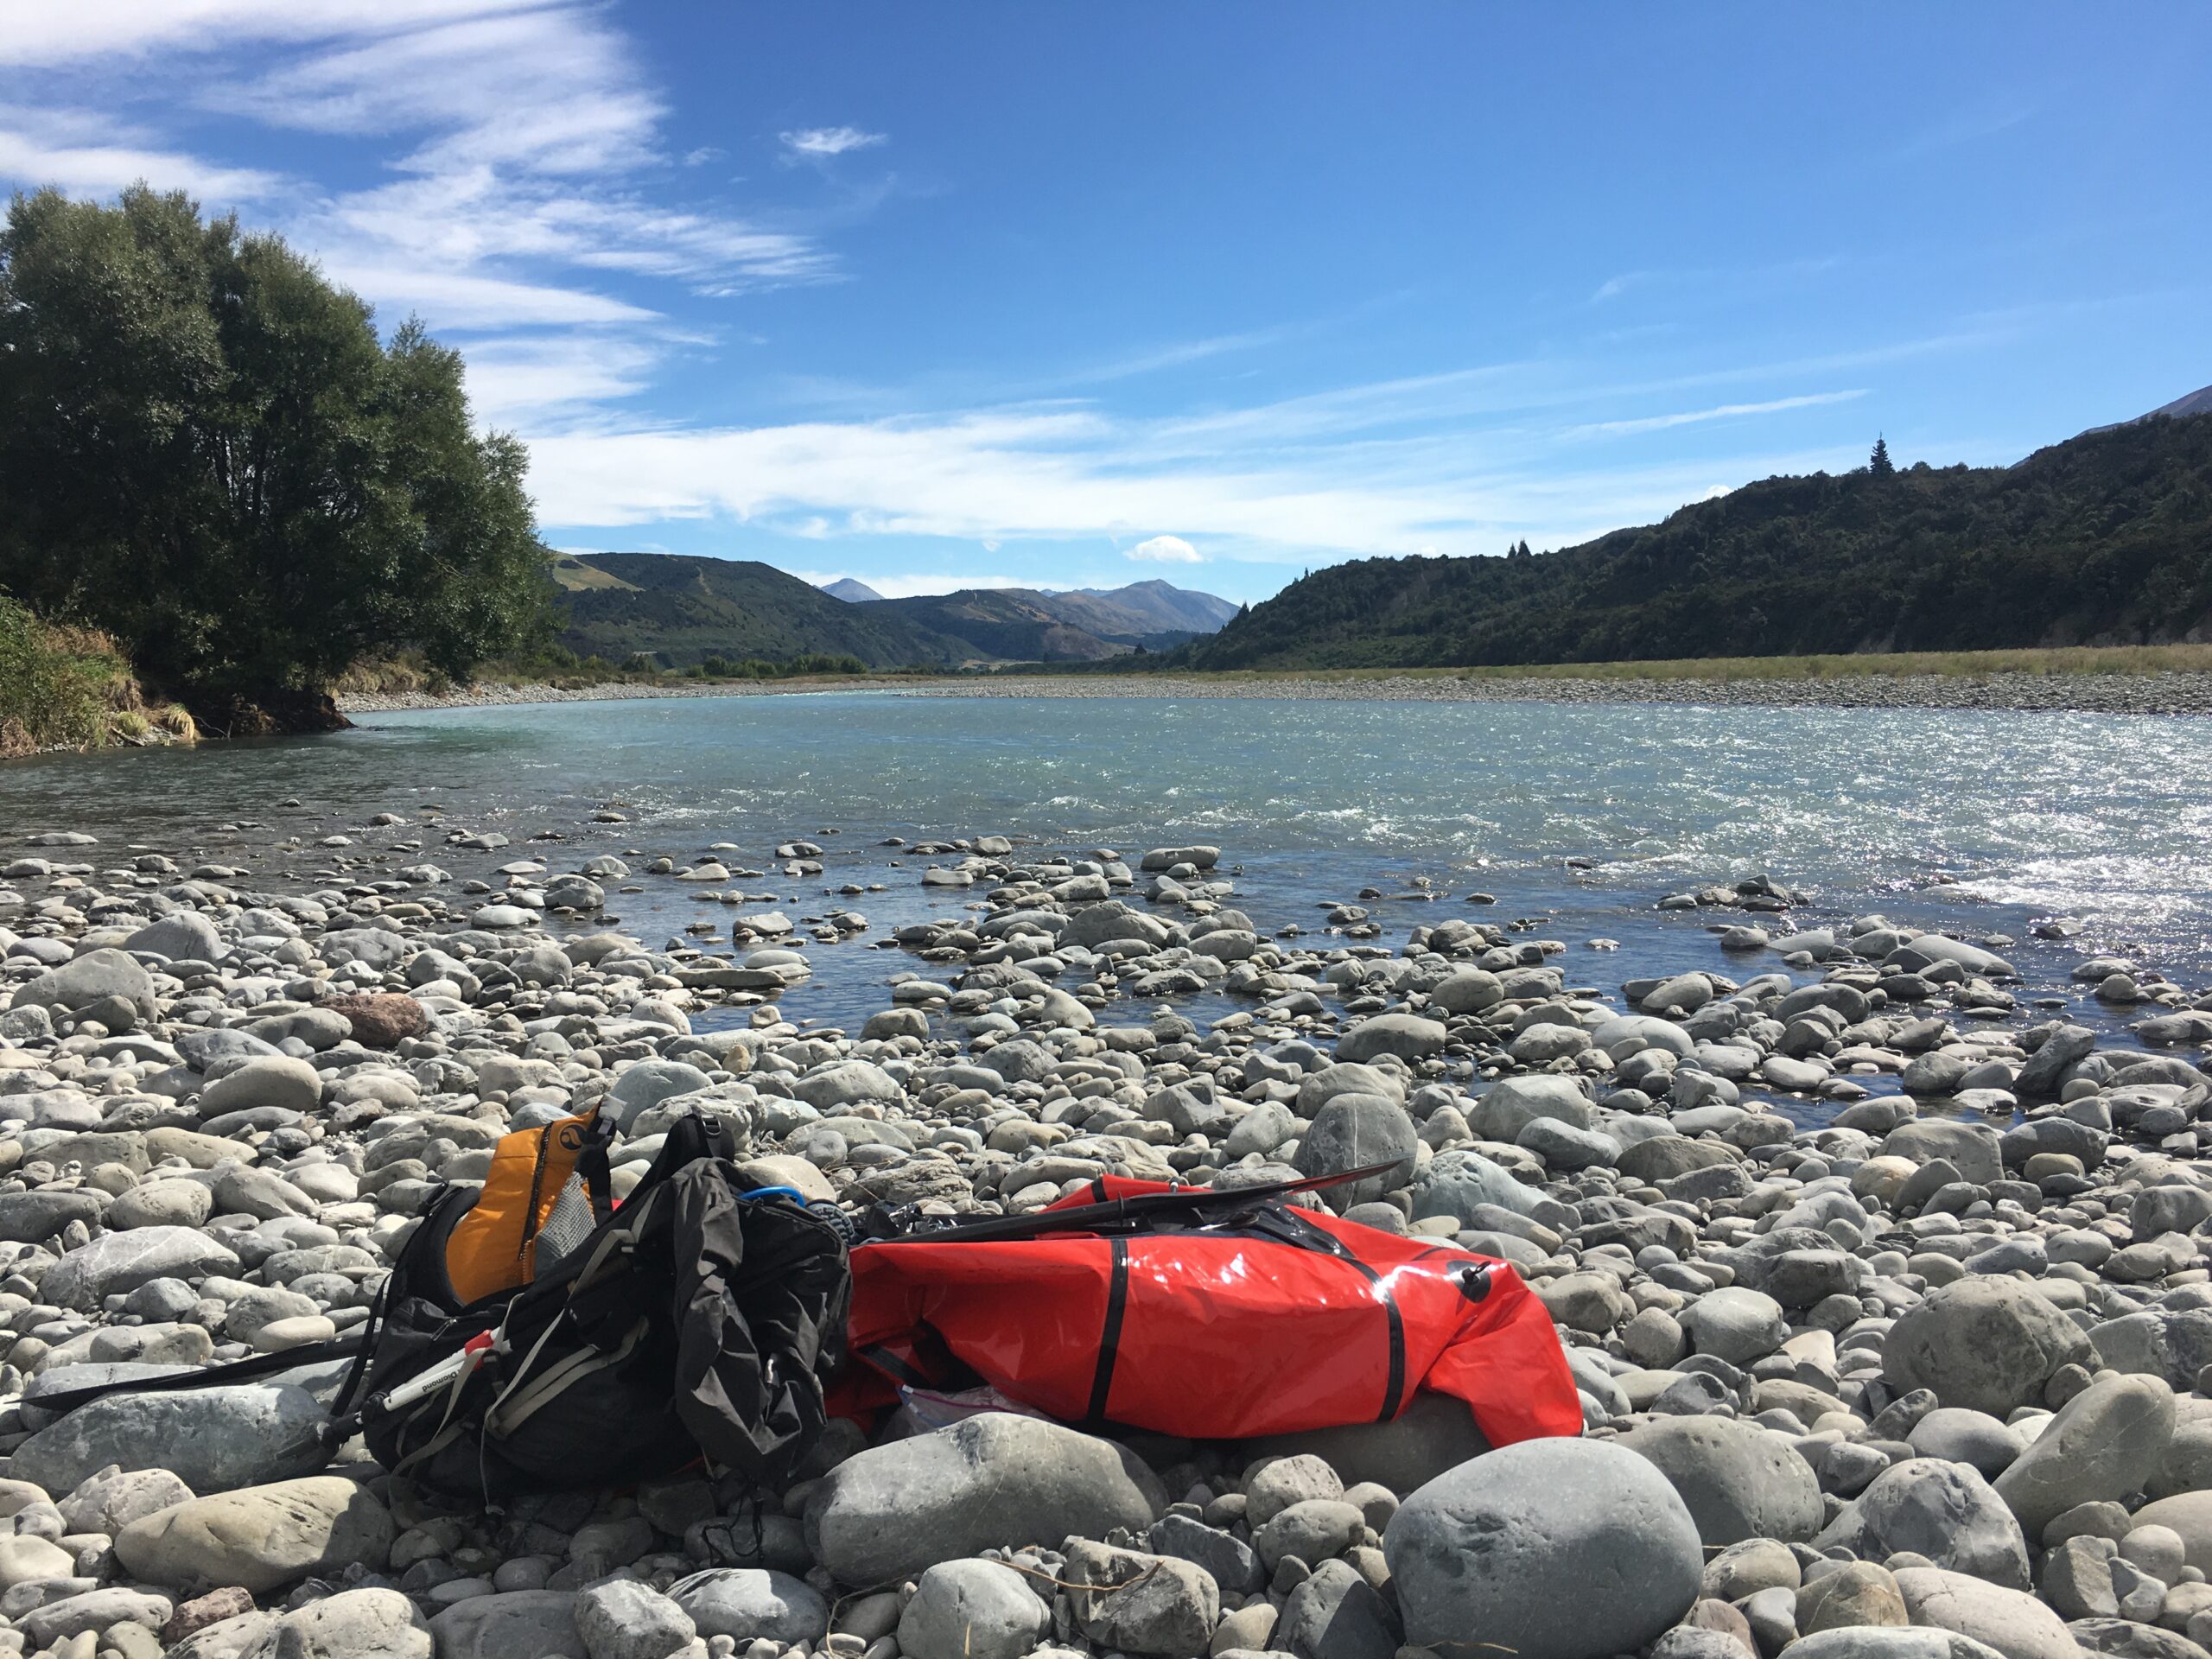 My packraft sits on the shore below the SH73 highway as I search for an access road to escape.